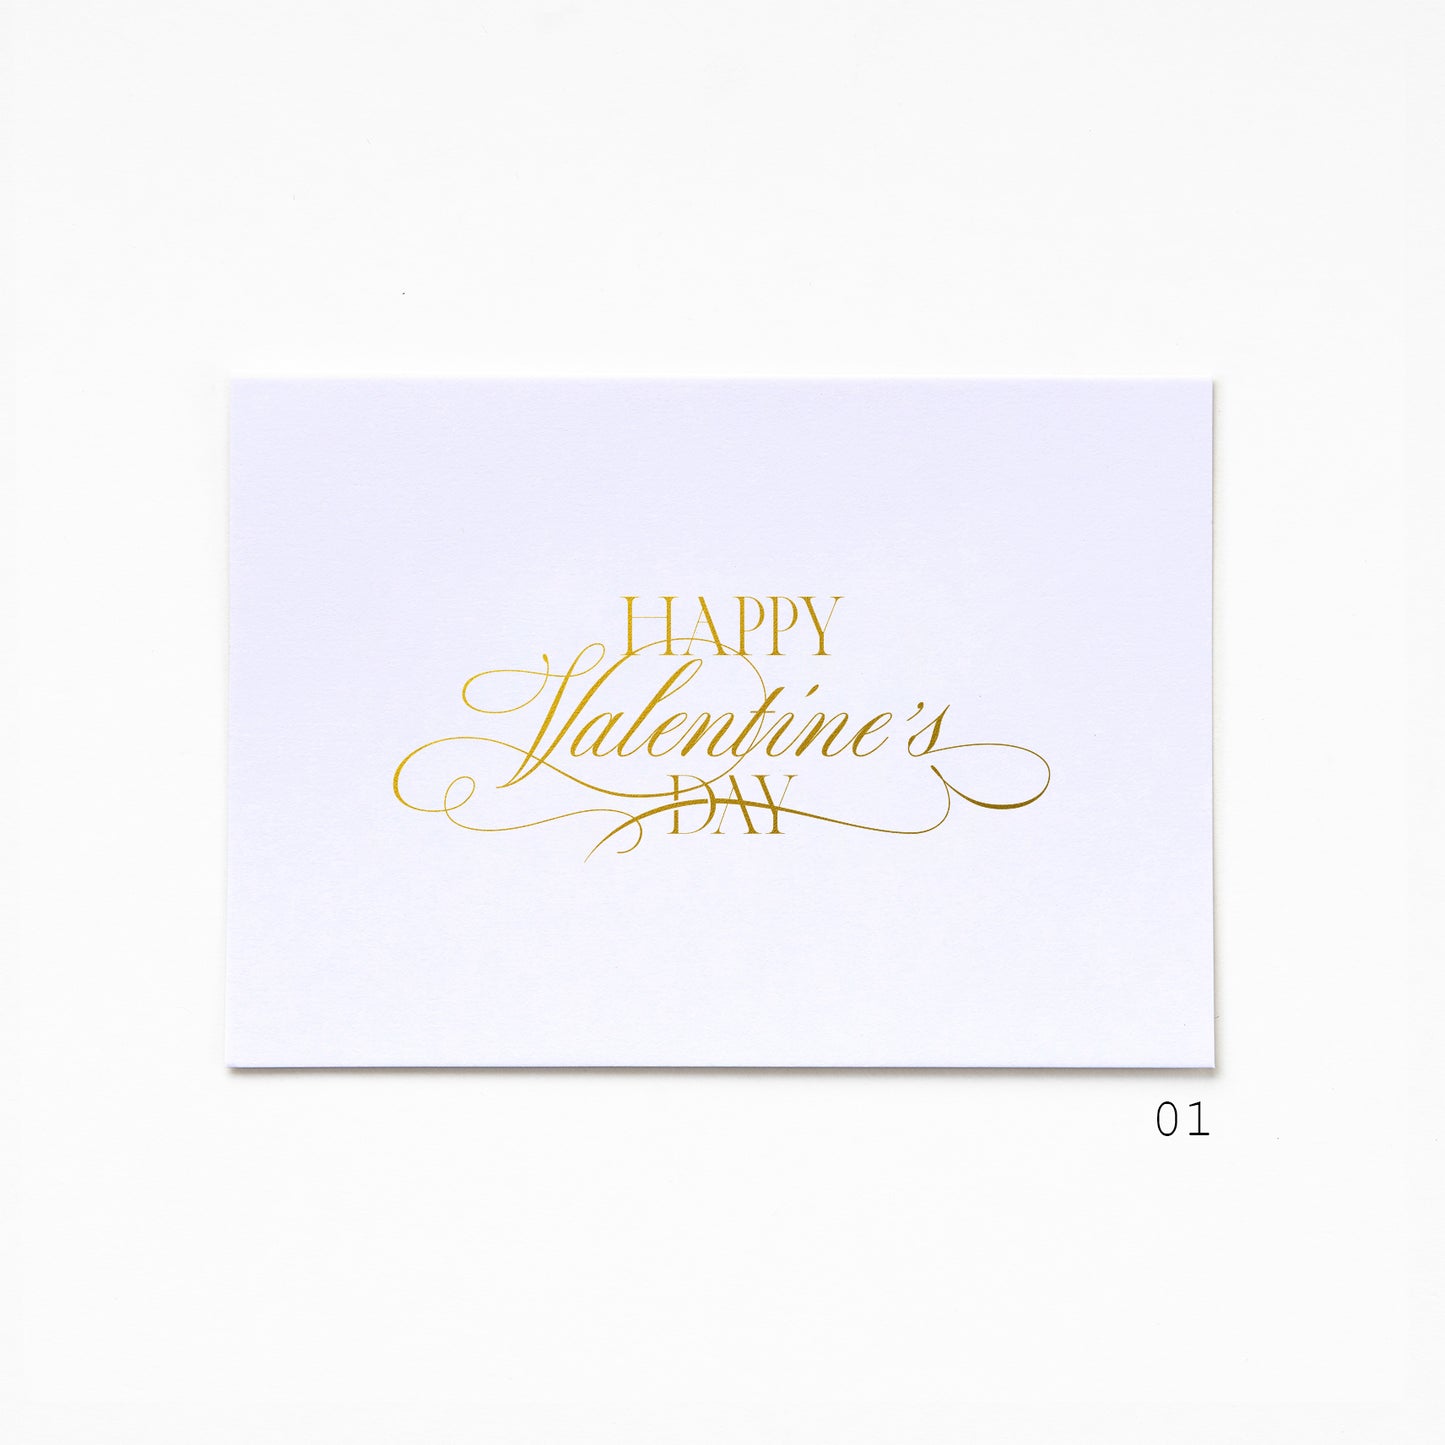 A6 Greeting Card - Happy Valentine's Day 01